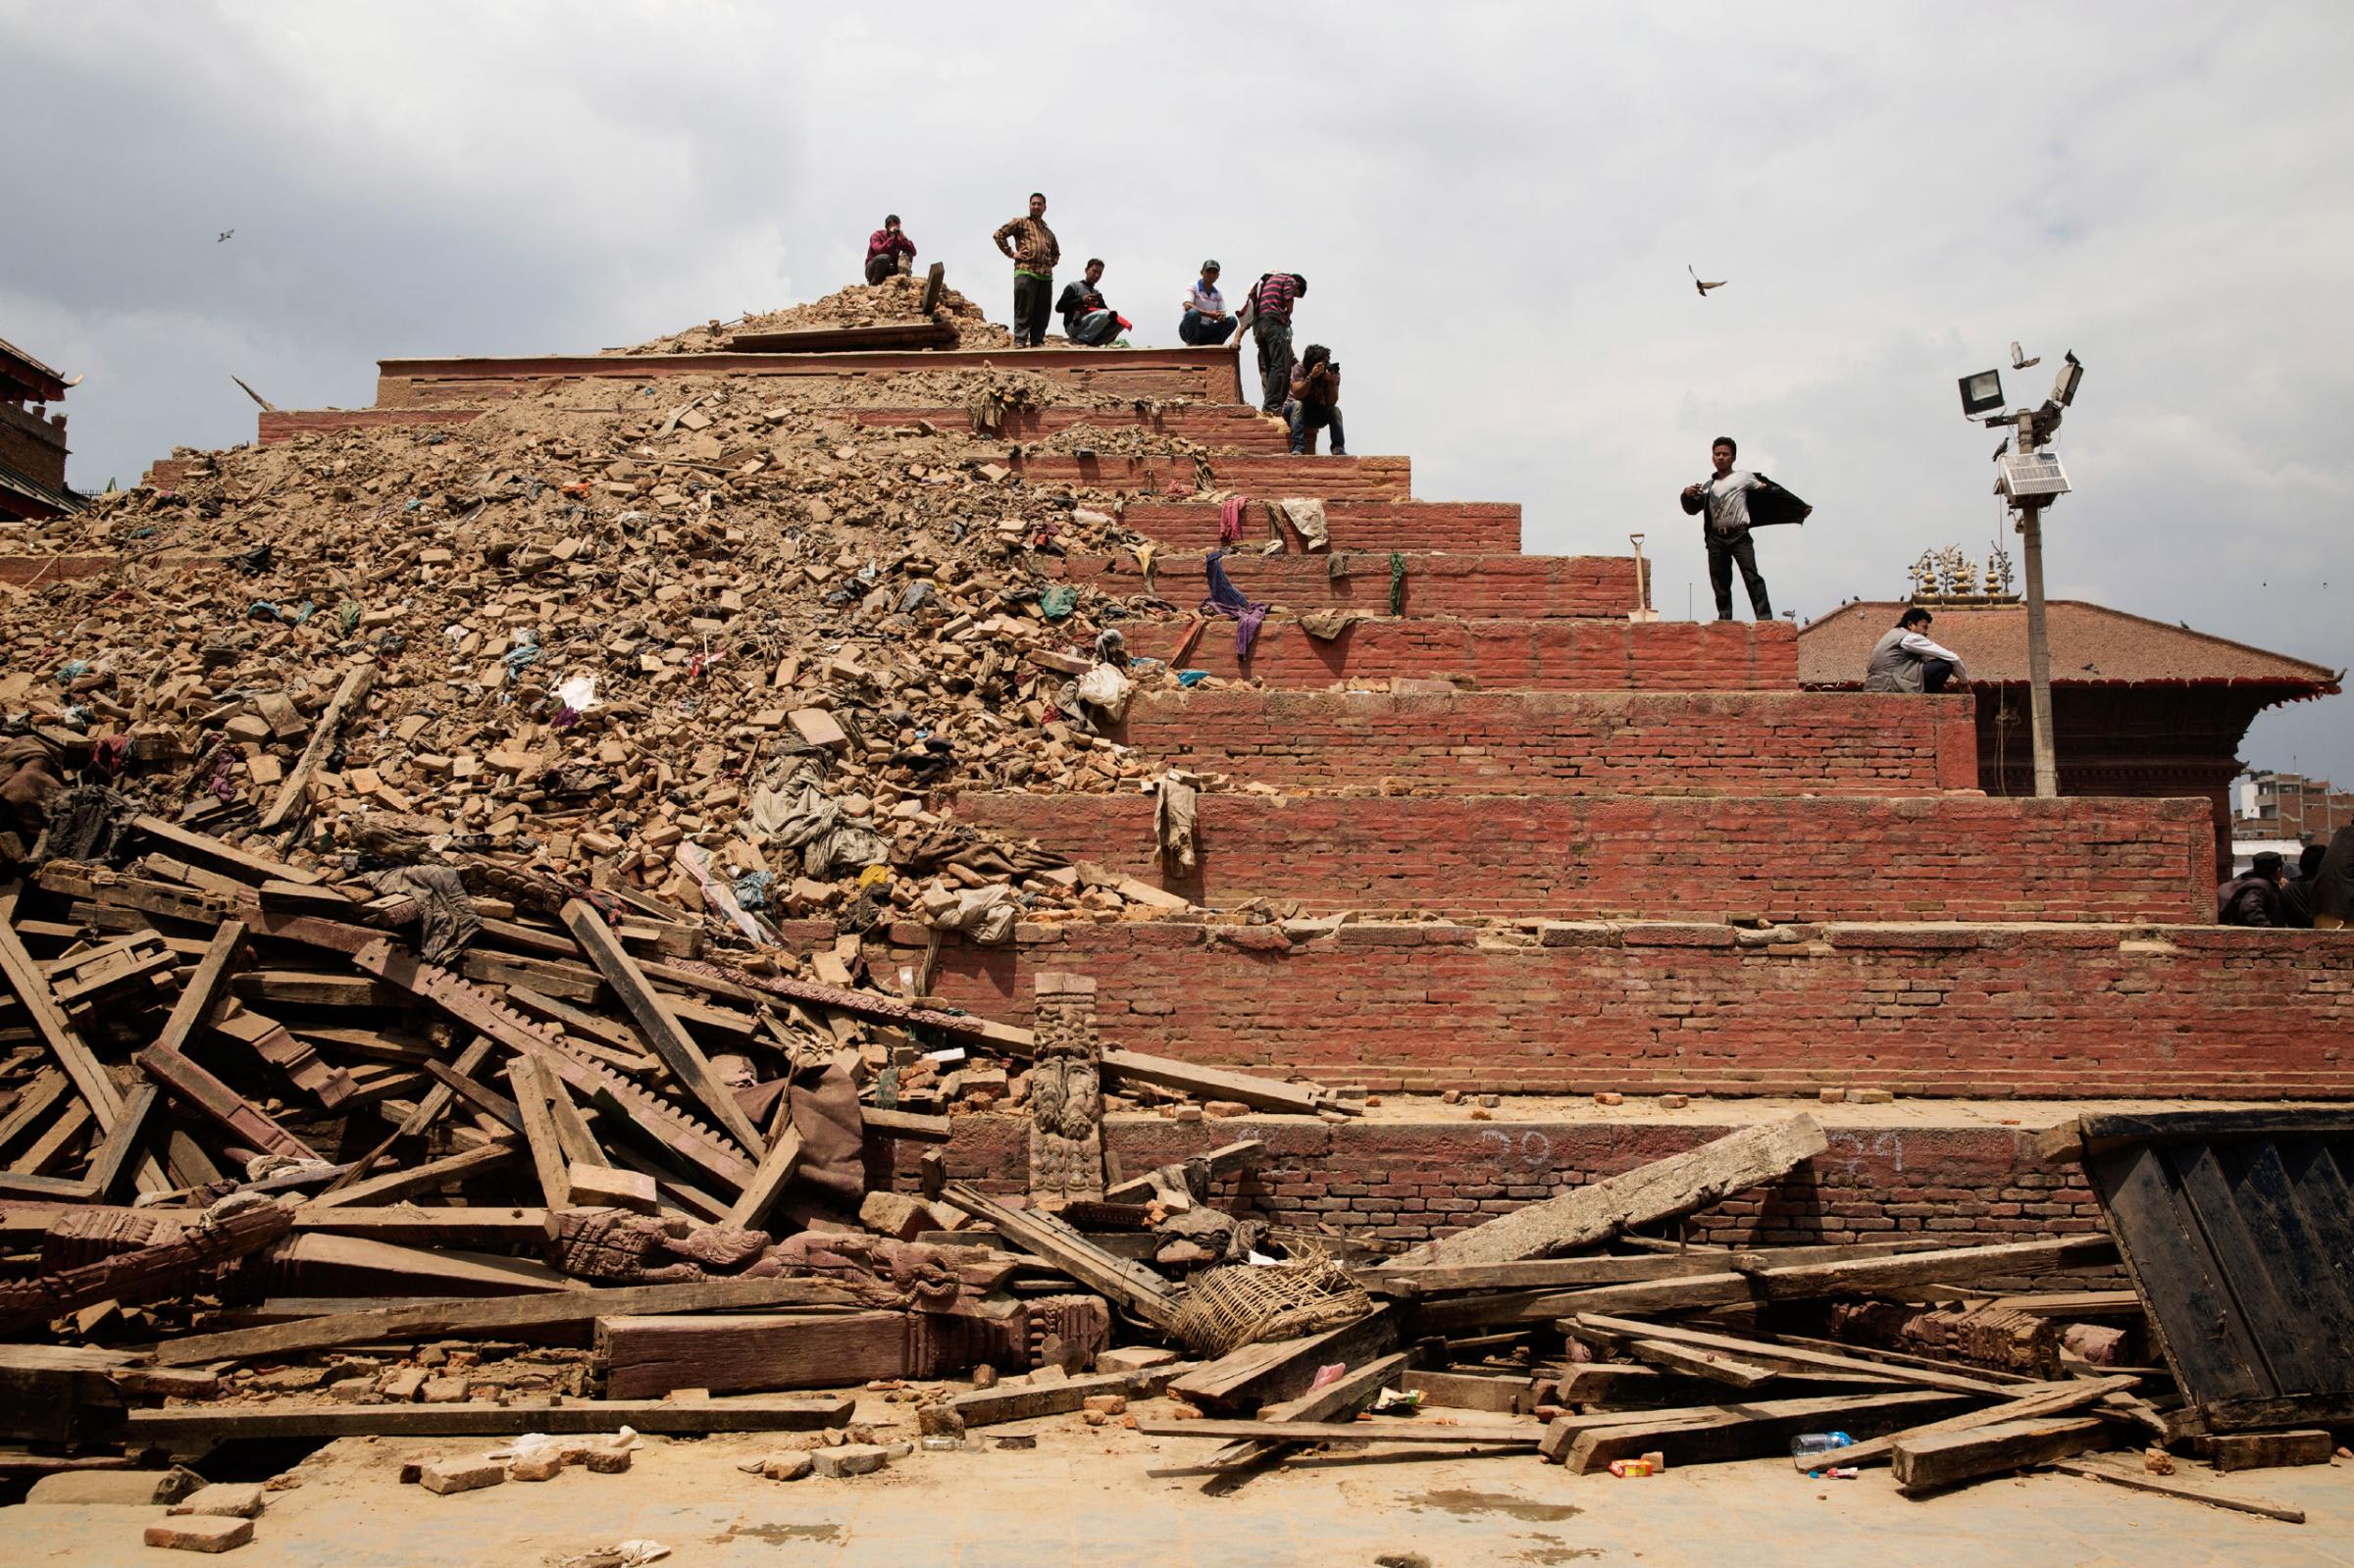 People atop damaged buildings in Durbar Square, Kathmandu, Nepal on April. 26, 2015. The historic Durbar Square, a UNESCO world heritage site, was severely damaged in an earthquake on April 25th. Photo by Adam Ferguson for Time